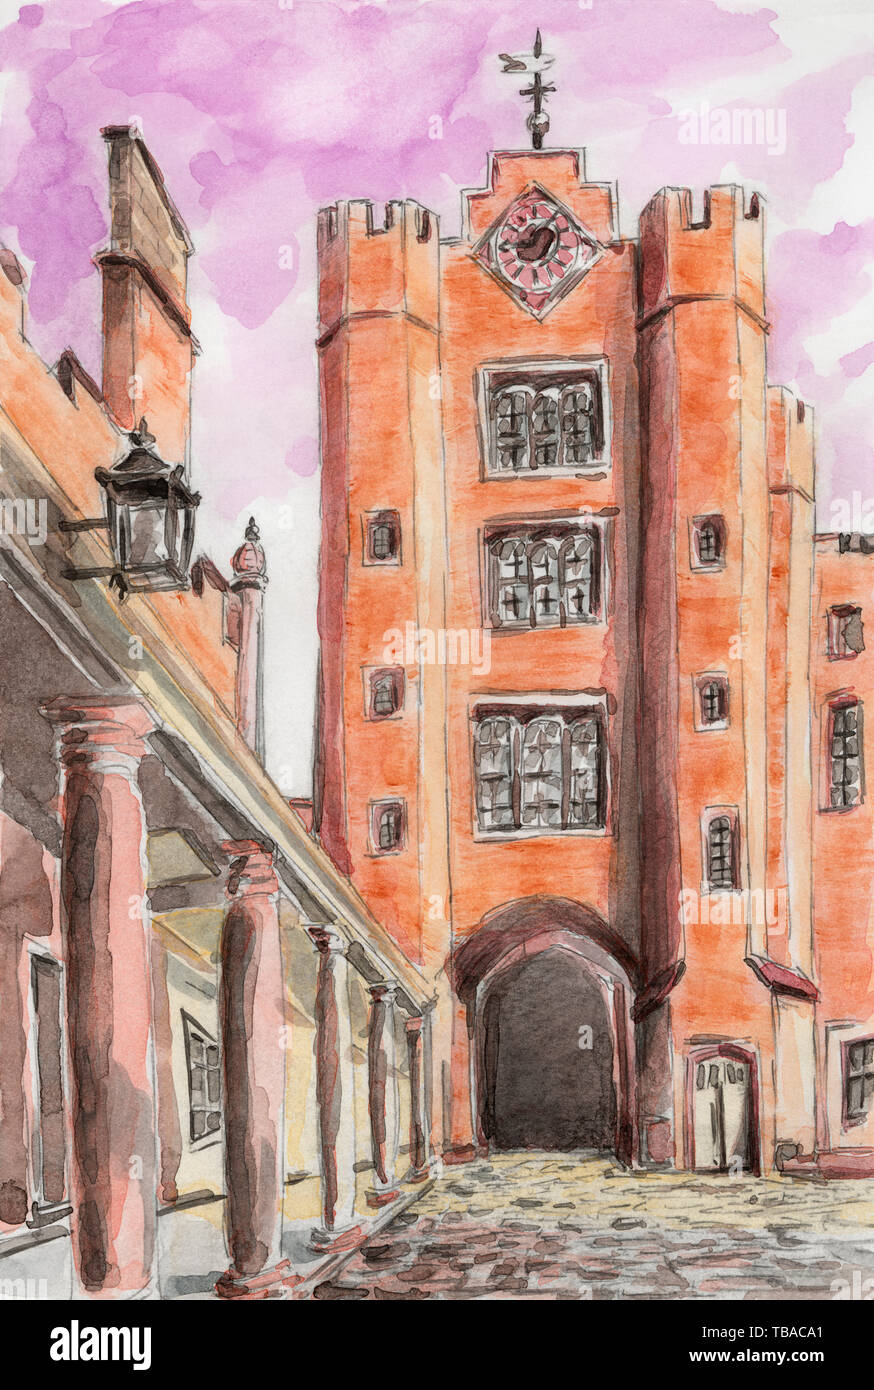 St James's Palace. London, UK. Pencil and watercolor on paper. Stock Photo